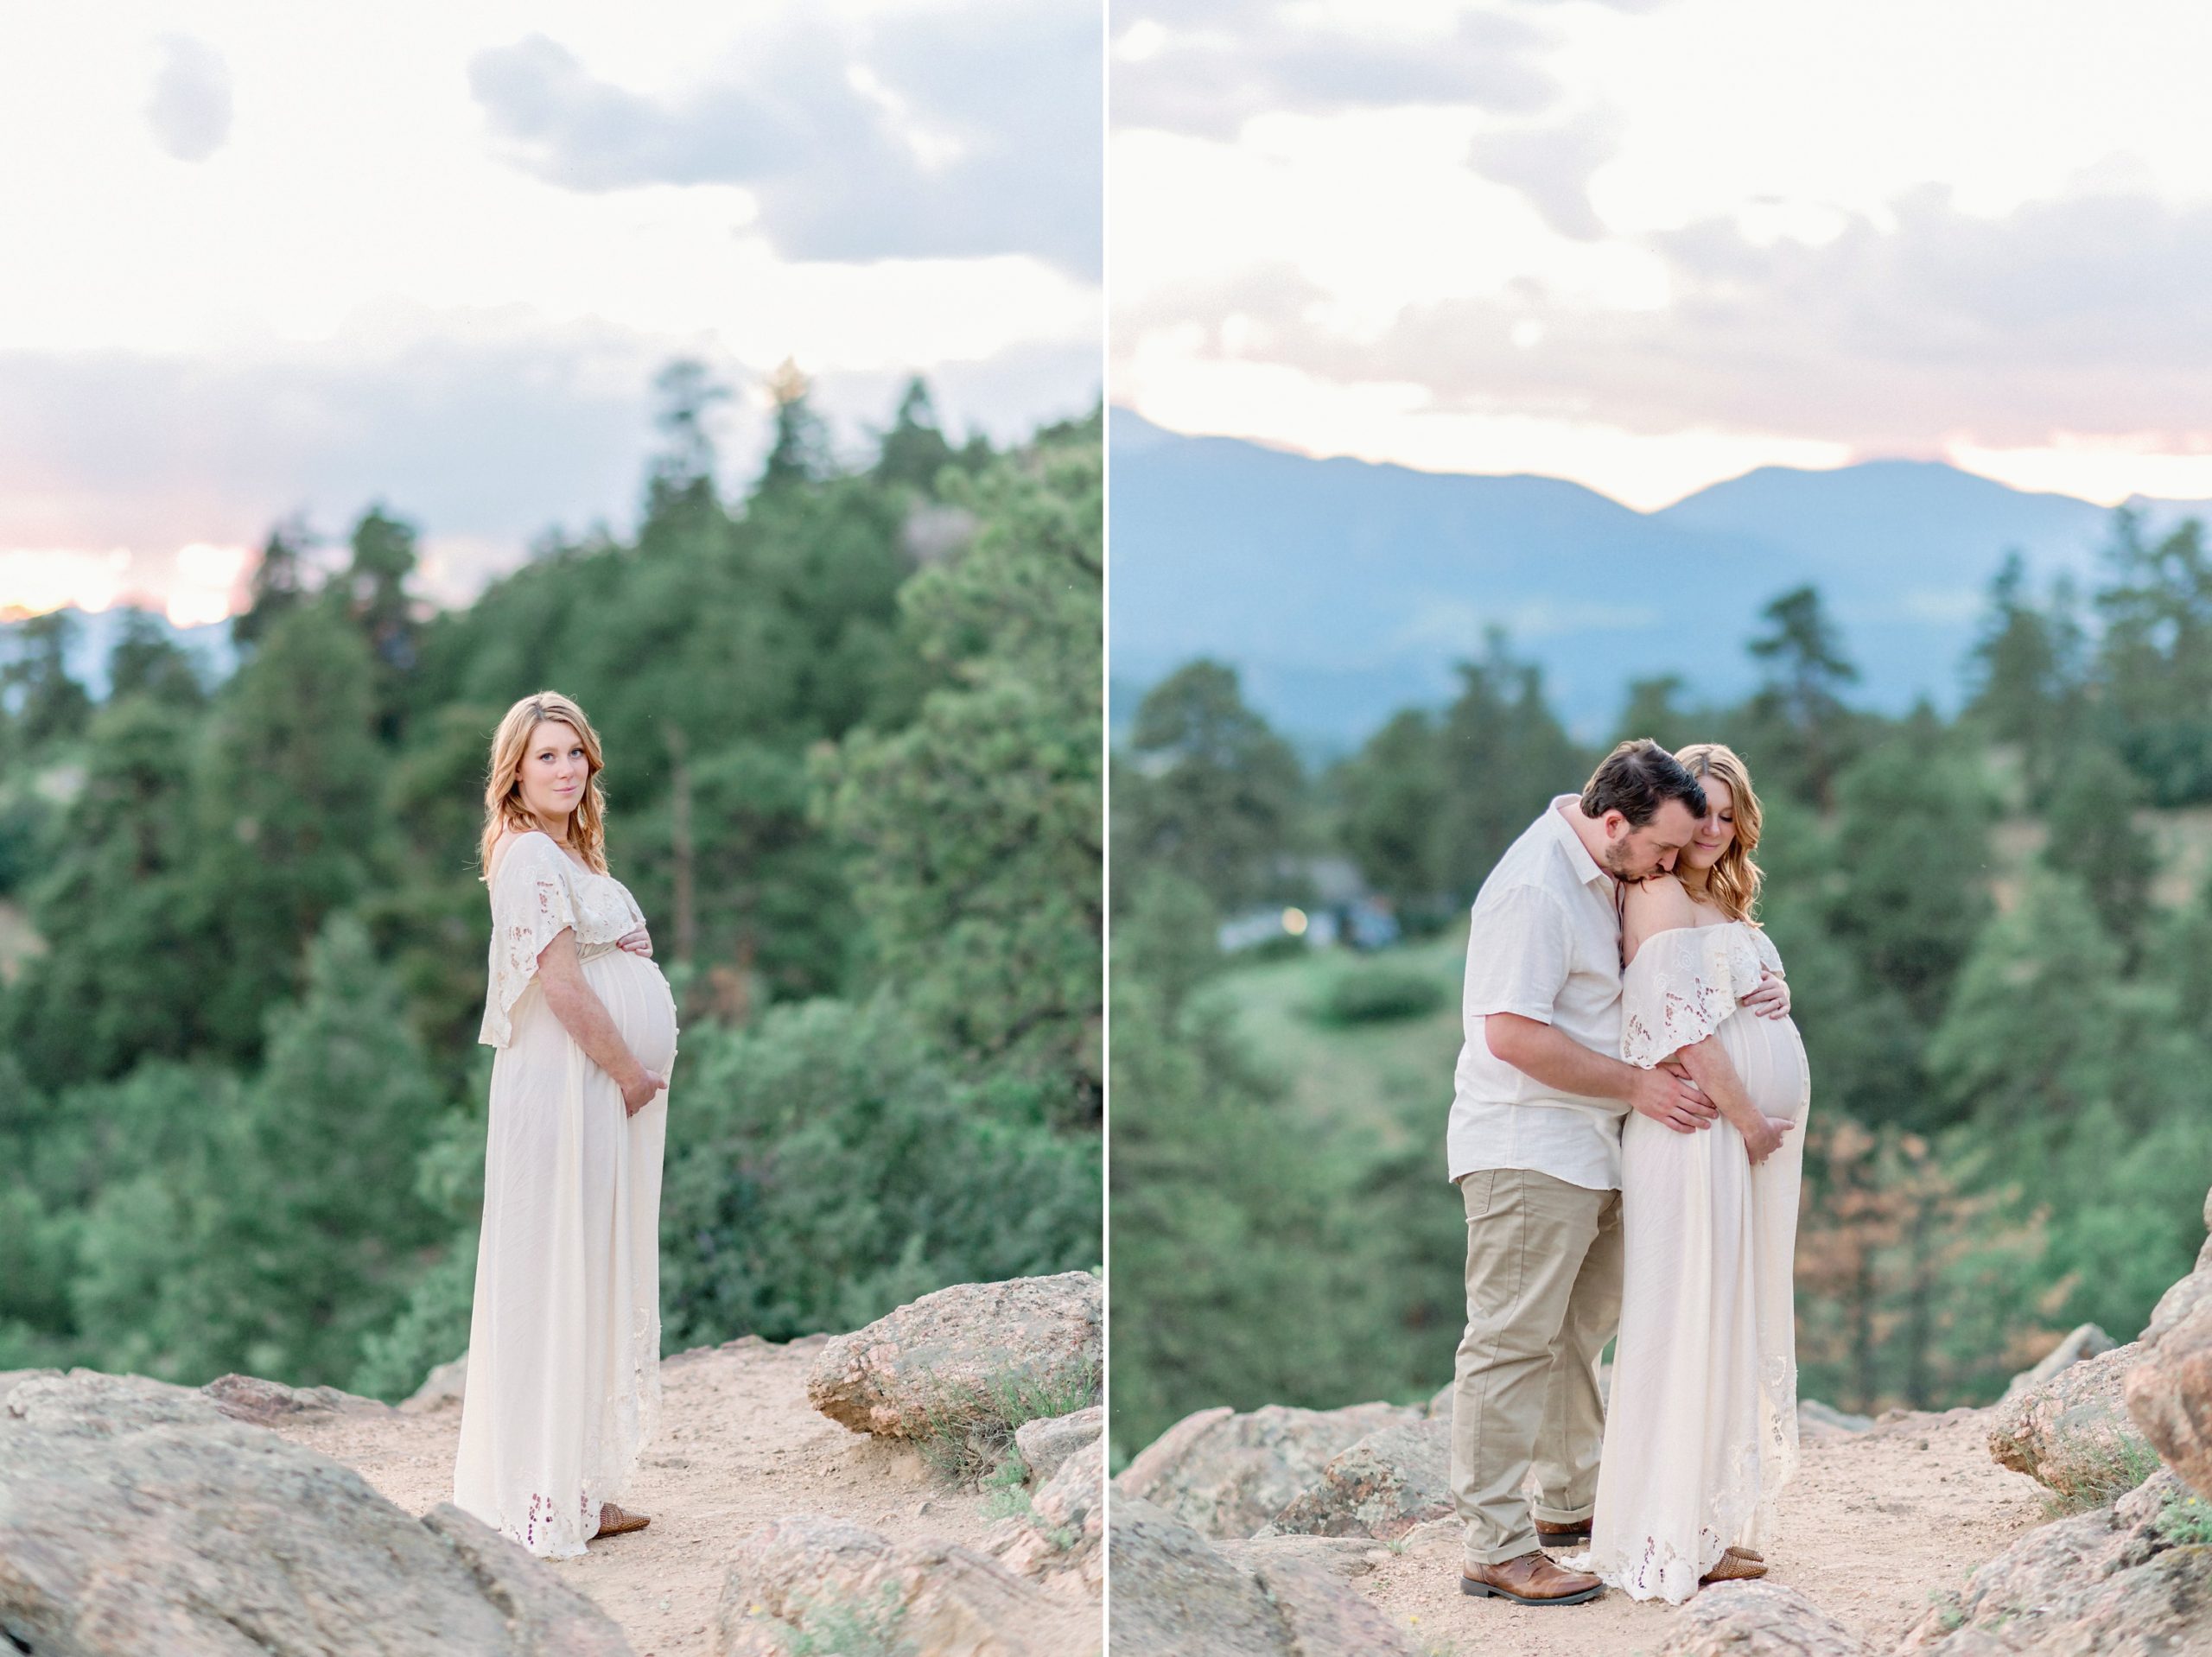 A sweet young couple expecting their first baby gets maternity photos done with the stunning backdrop of Mount Falcon in Denver, Colorado.